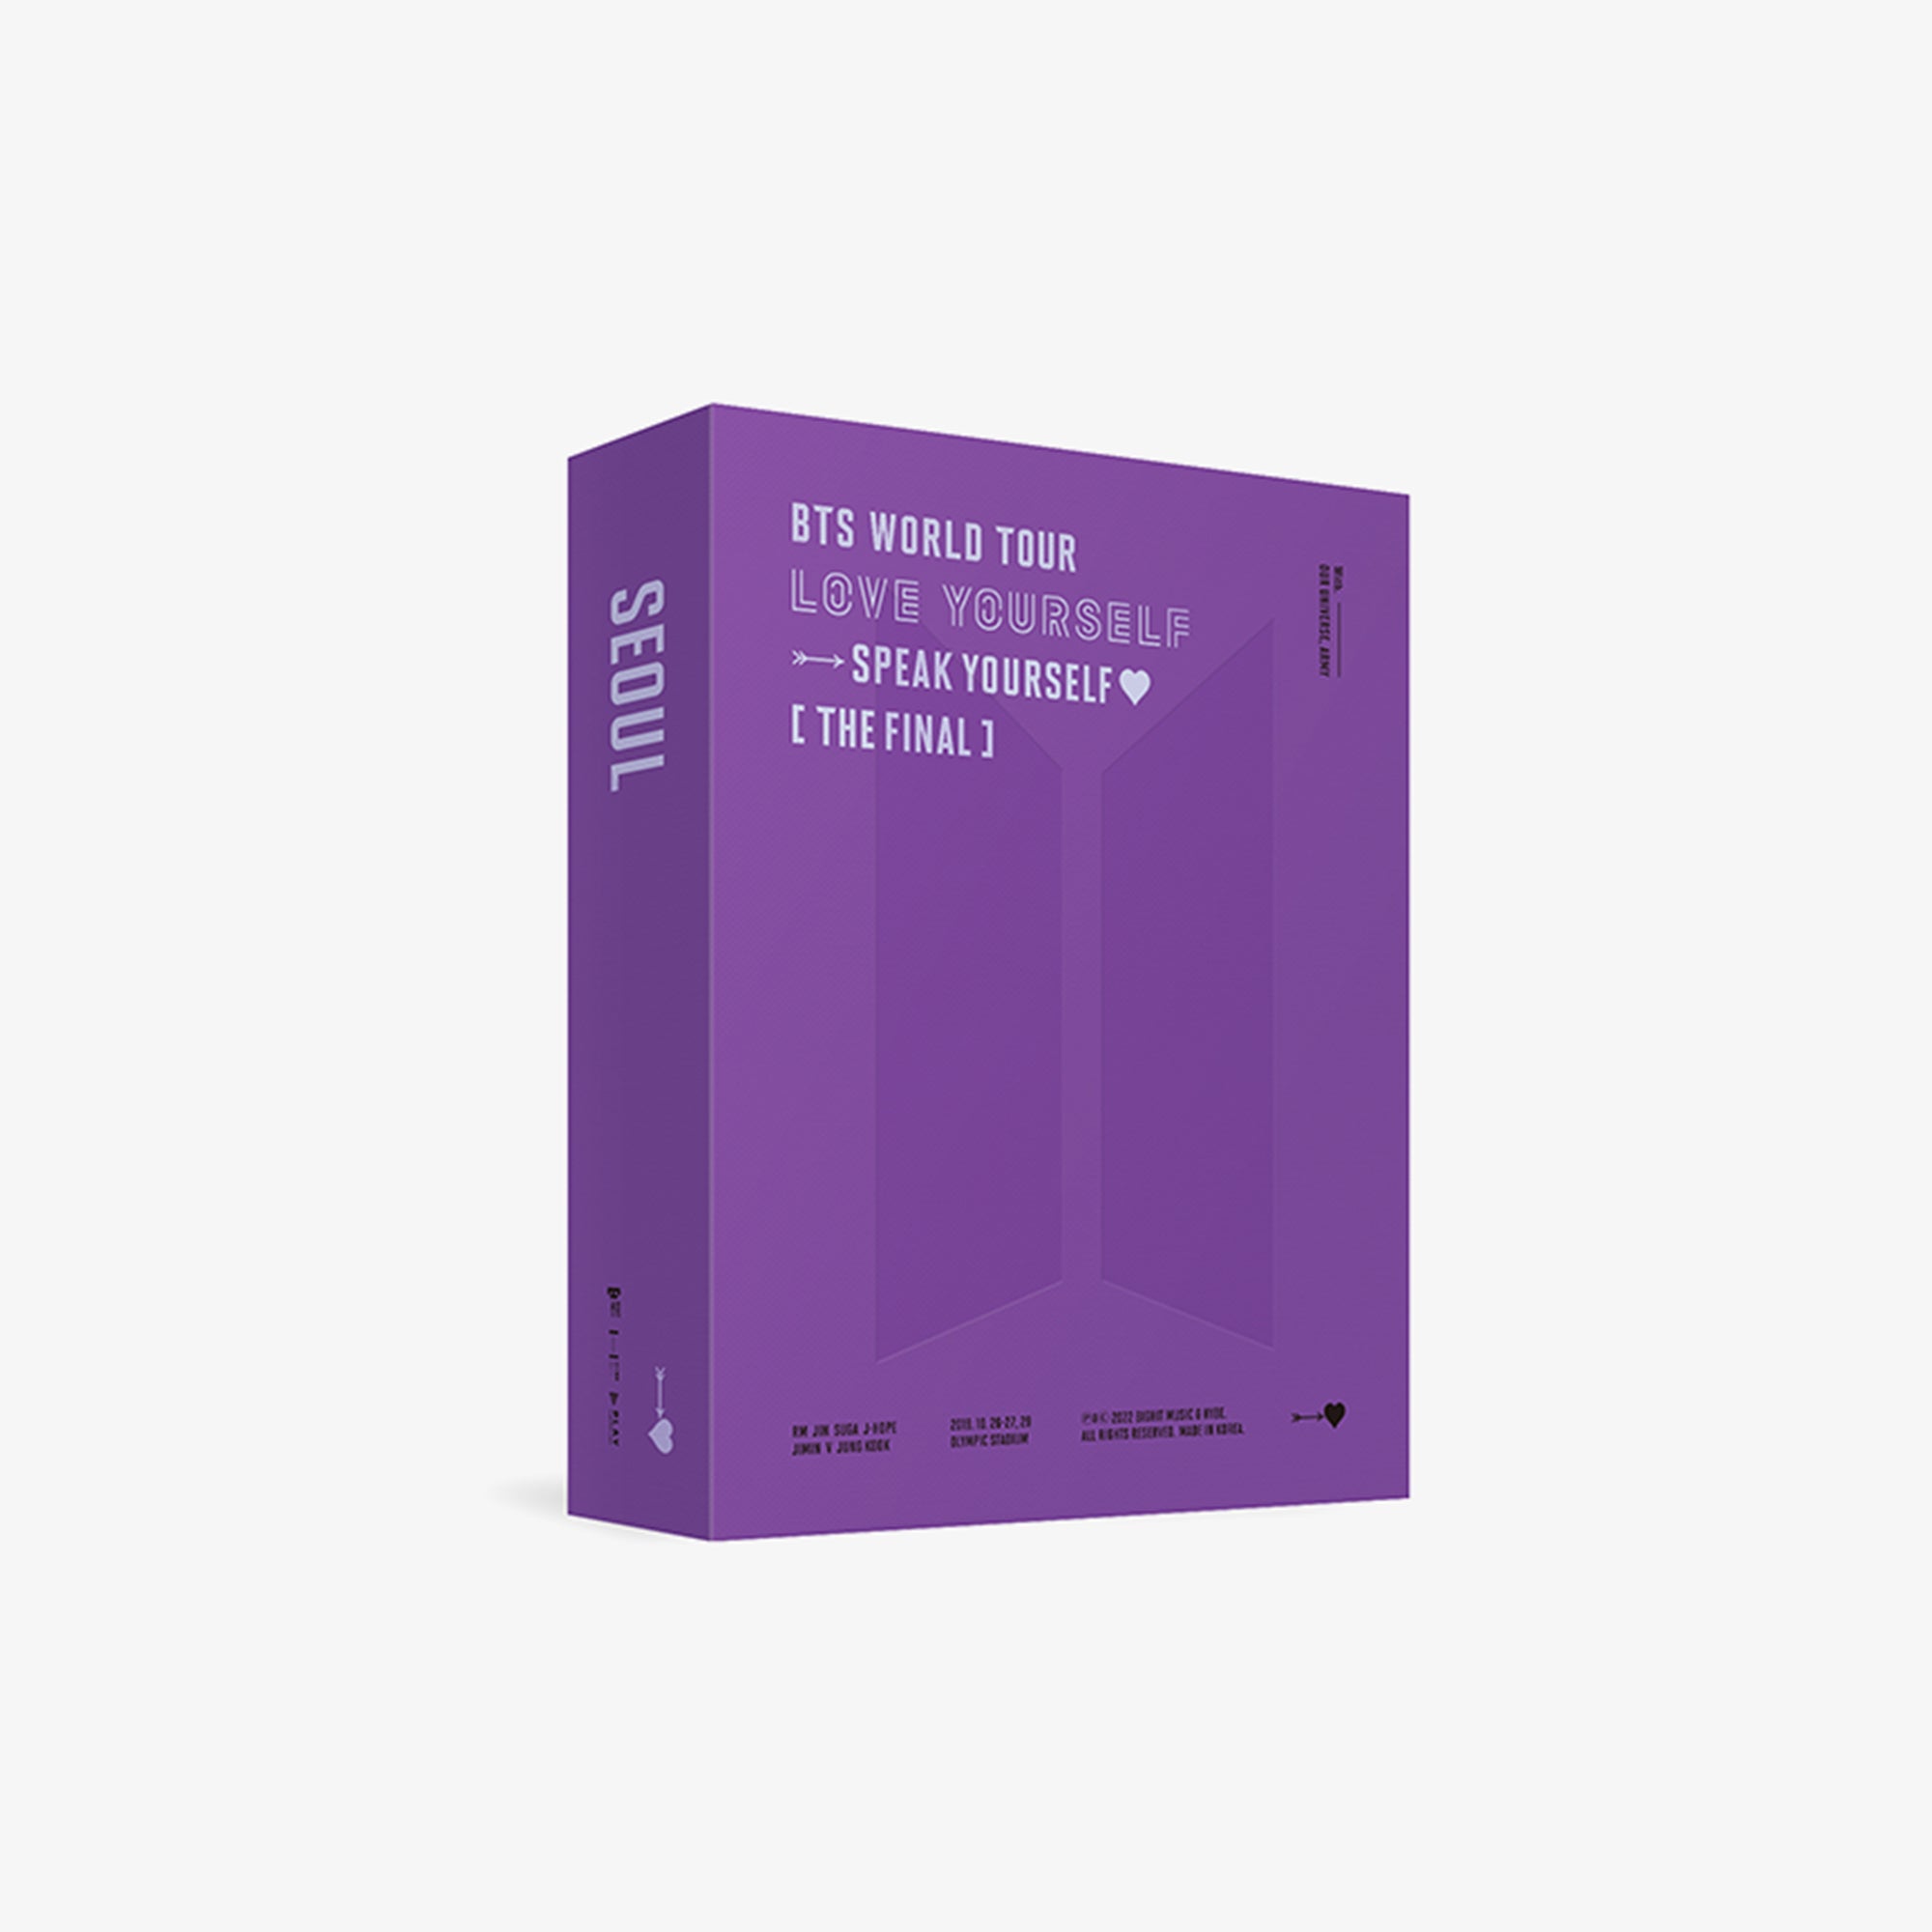 BTS WORLD TOUR LOVE YOURSELF 'SPEAK YOURSELF♥' [THE FINAL] DIGITAL CODE COVER